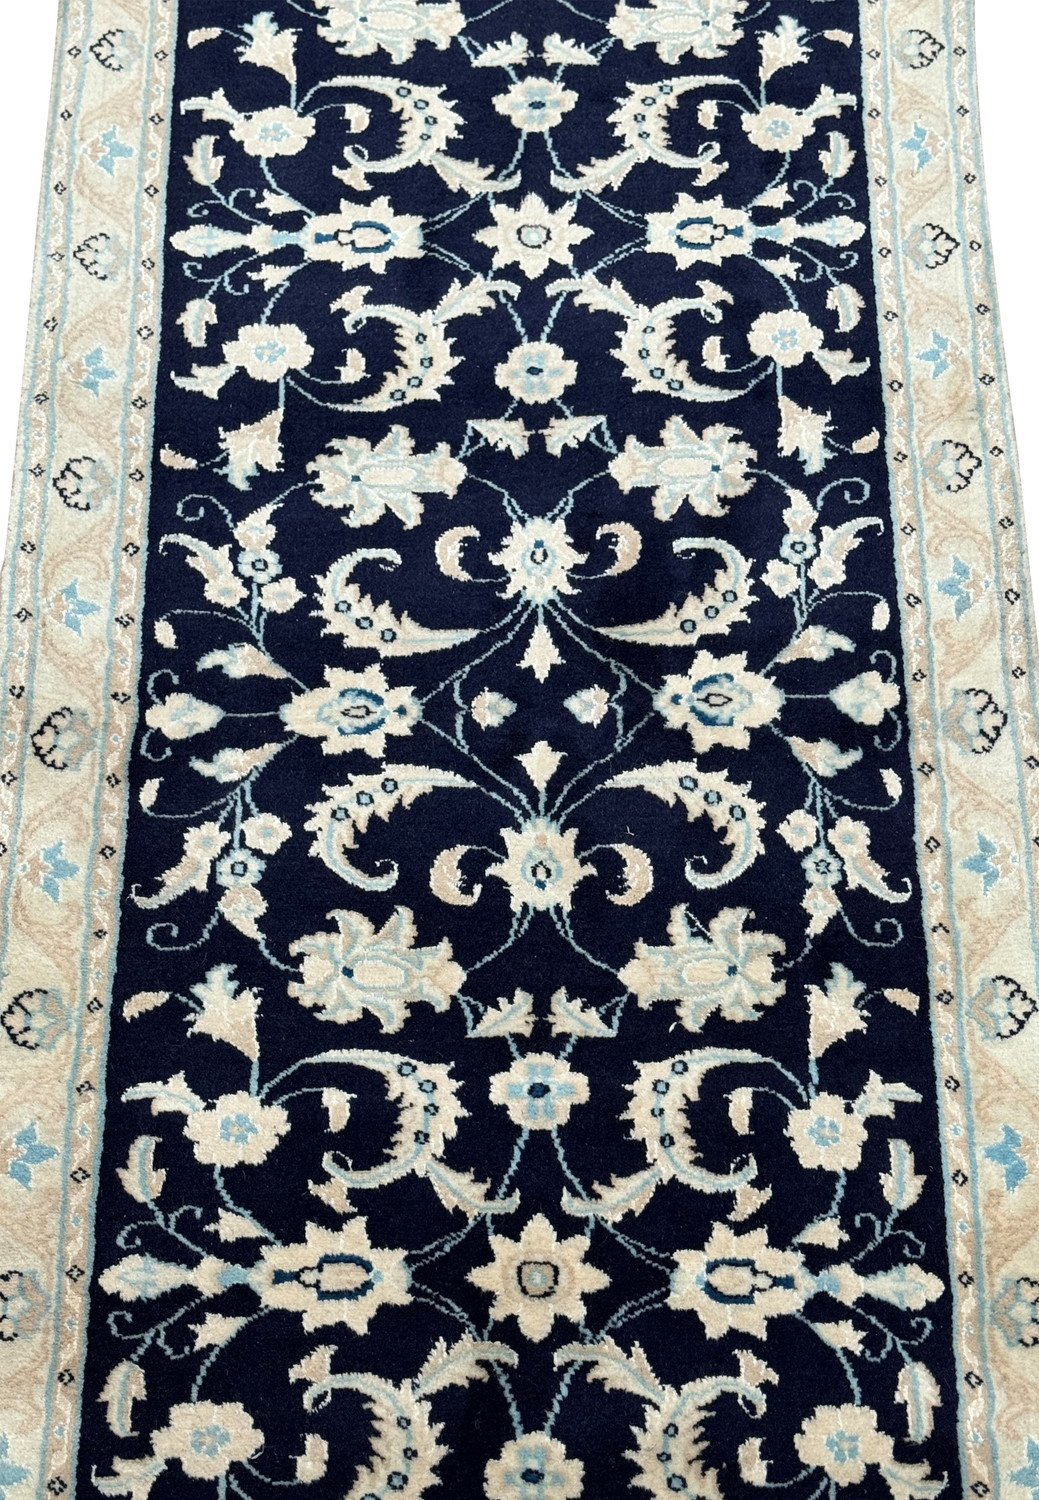 Close-up view of Persian Nain Runner showcasing the detailed floral and vine patterns on navy blue background